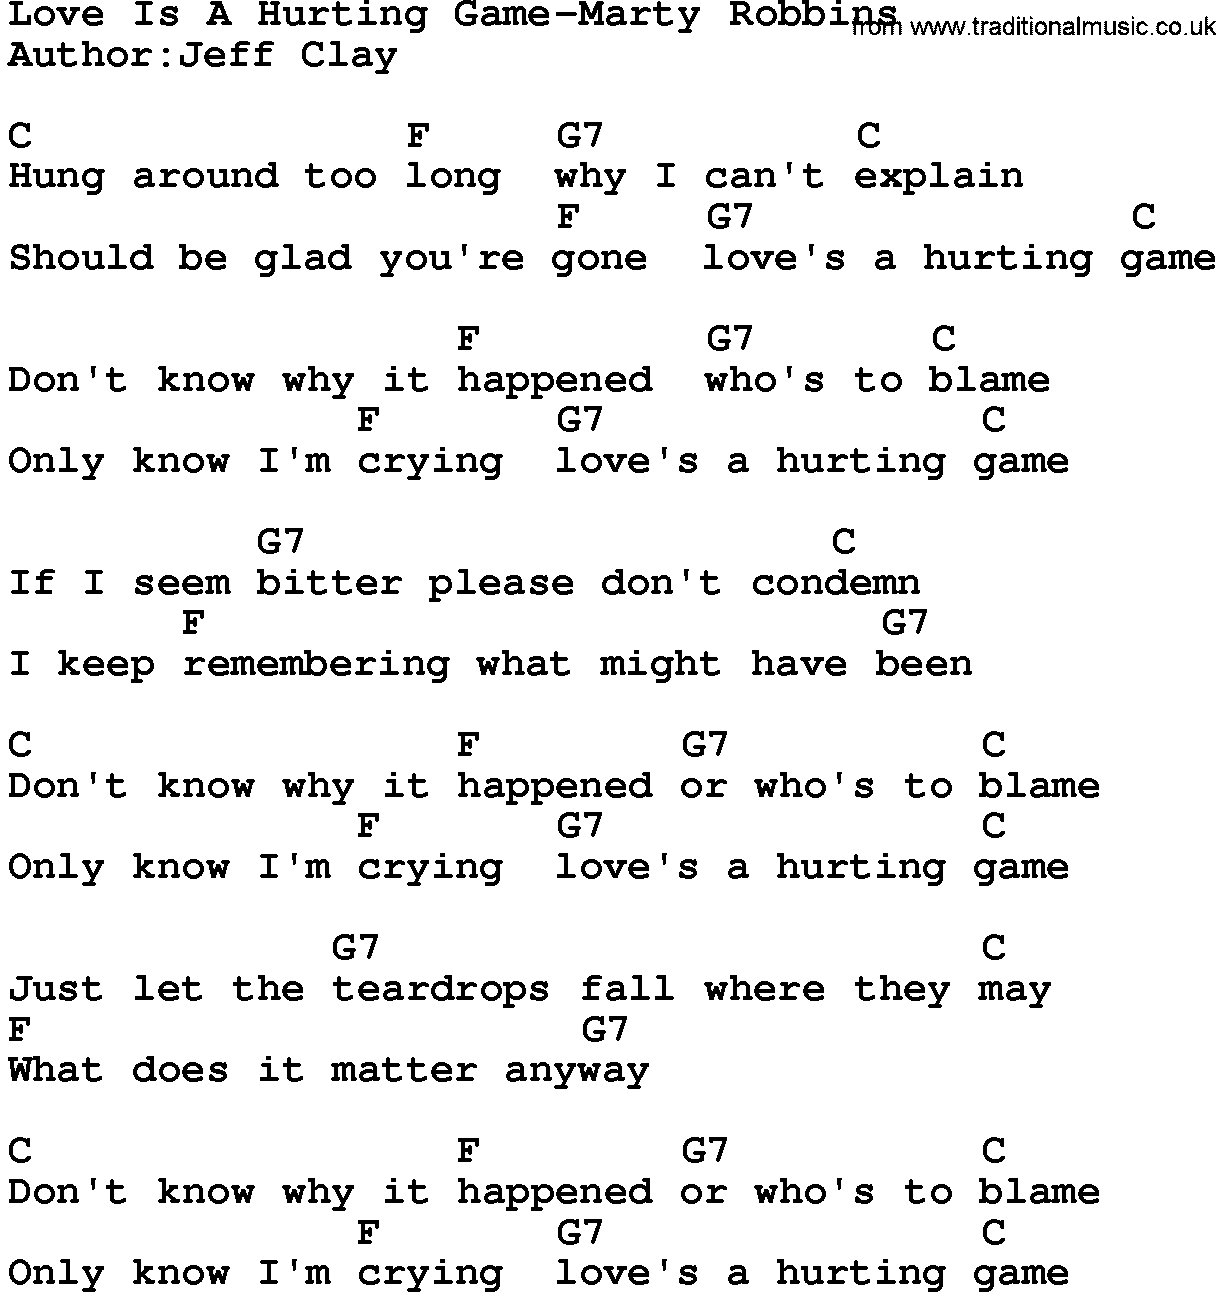 Country music song: Love Is A Hurting Game-Marty Robbins lyrics and chords